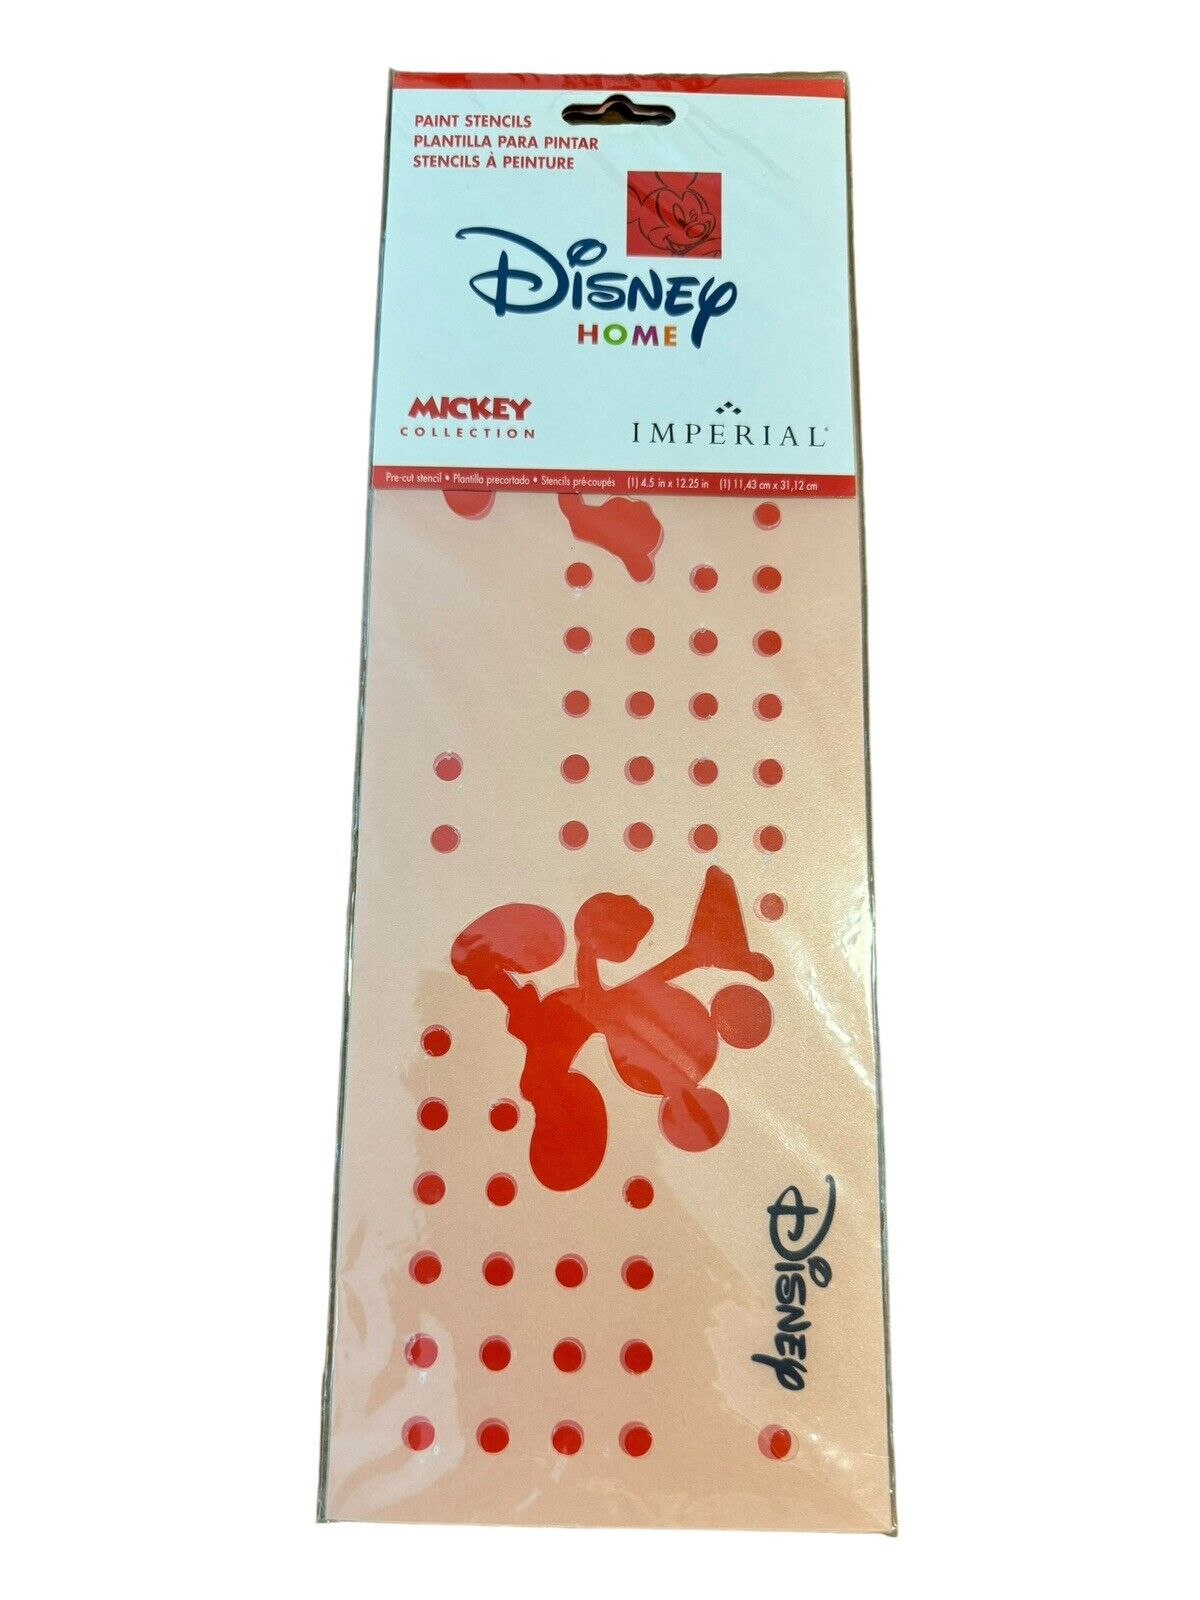 Disney Home Paint Stencils - Mickey Collection - NIP